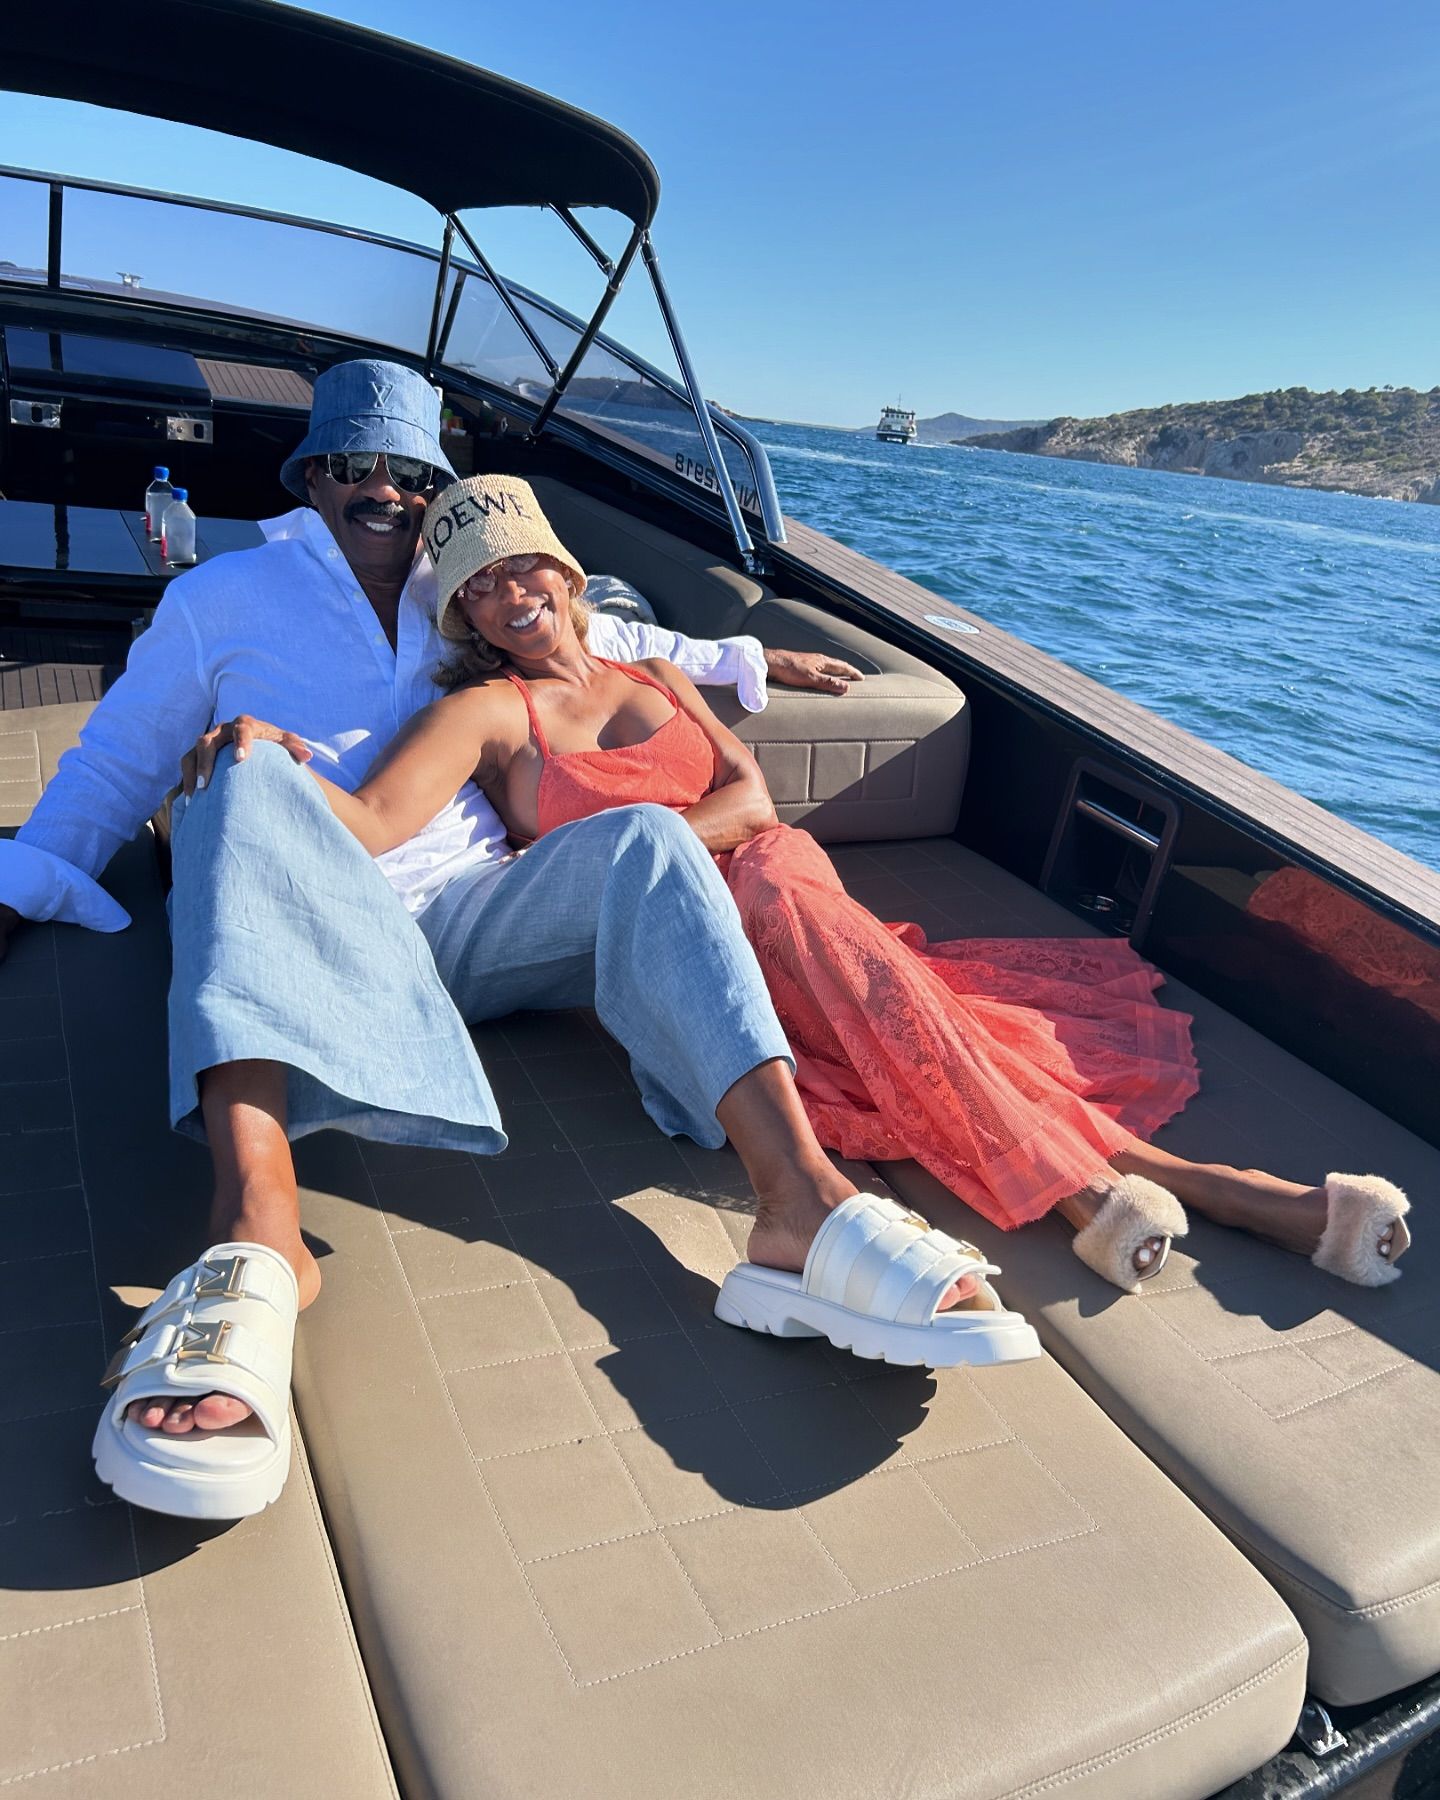 Steve Harvey and his wife went on an anniversary trip, where they are sharing photos